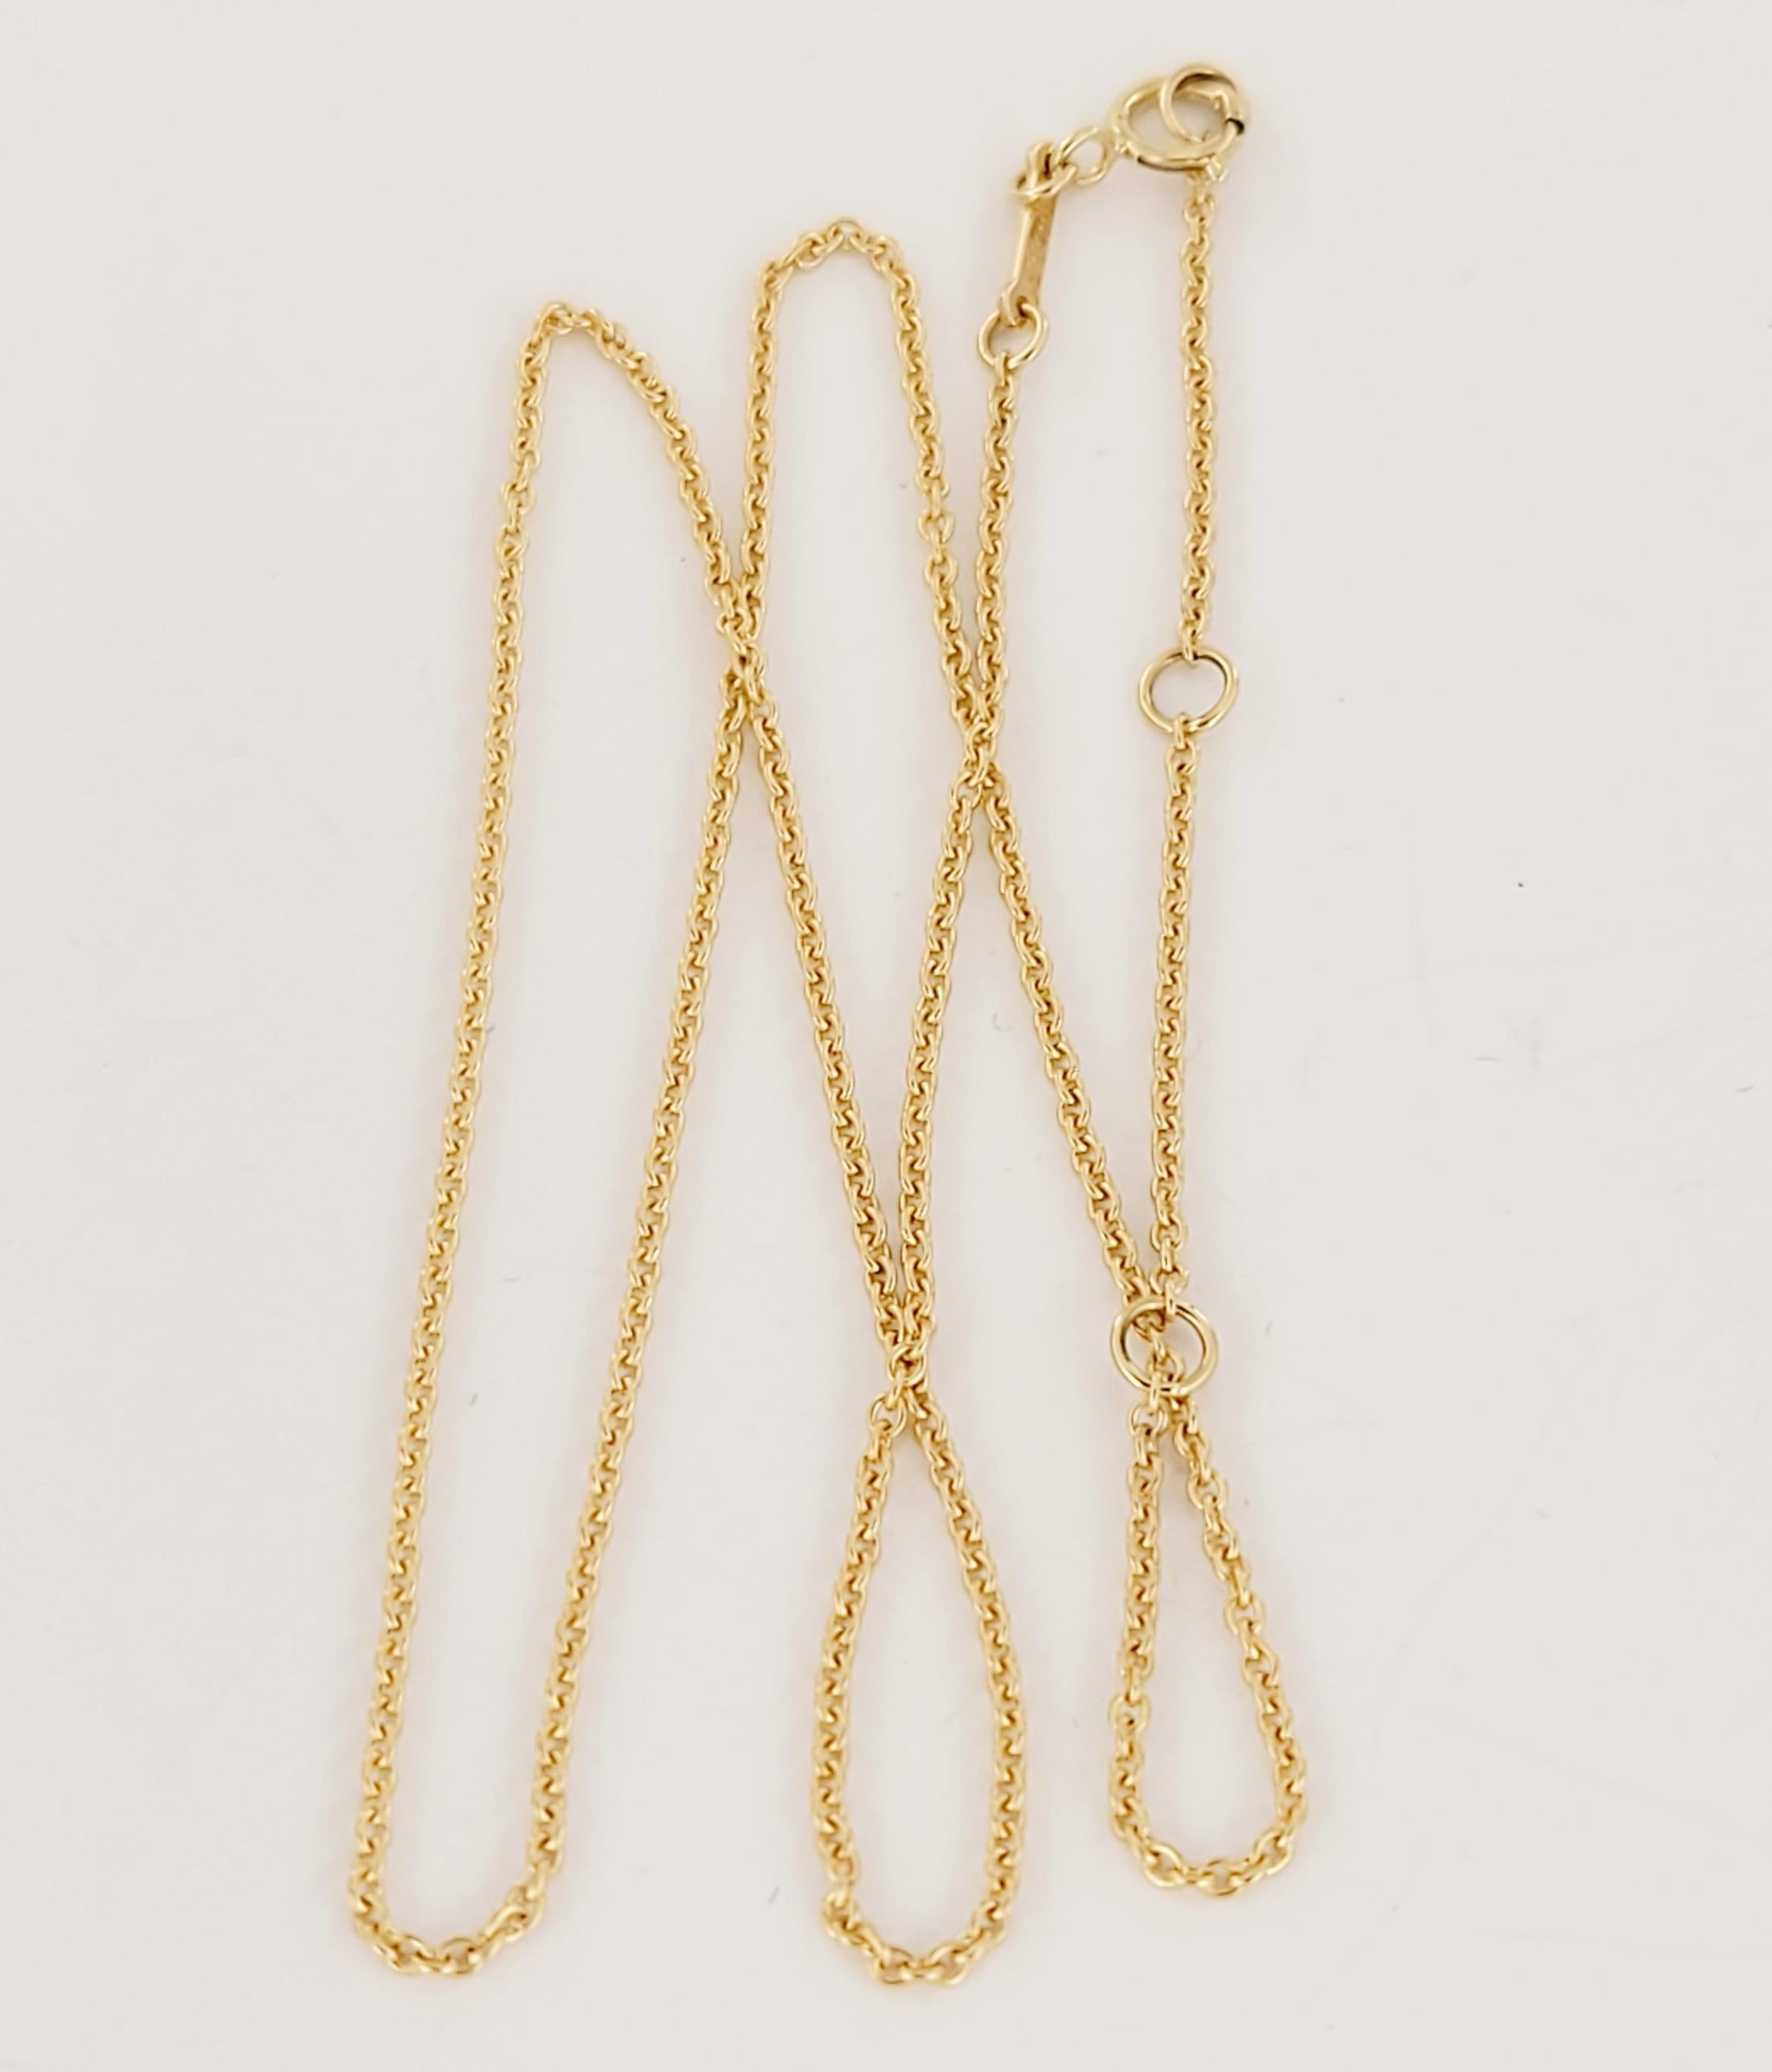 Paloma Picasso Tiffany & Co
Chain Length 16'' Long 
Adjustable Chain 14'' 15'' 16'' 
Metal 18K Yellow Gold 
Chain Weight 2.3gr
Condition New, never worn
Comes with Tiffany & Co Pouch